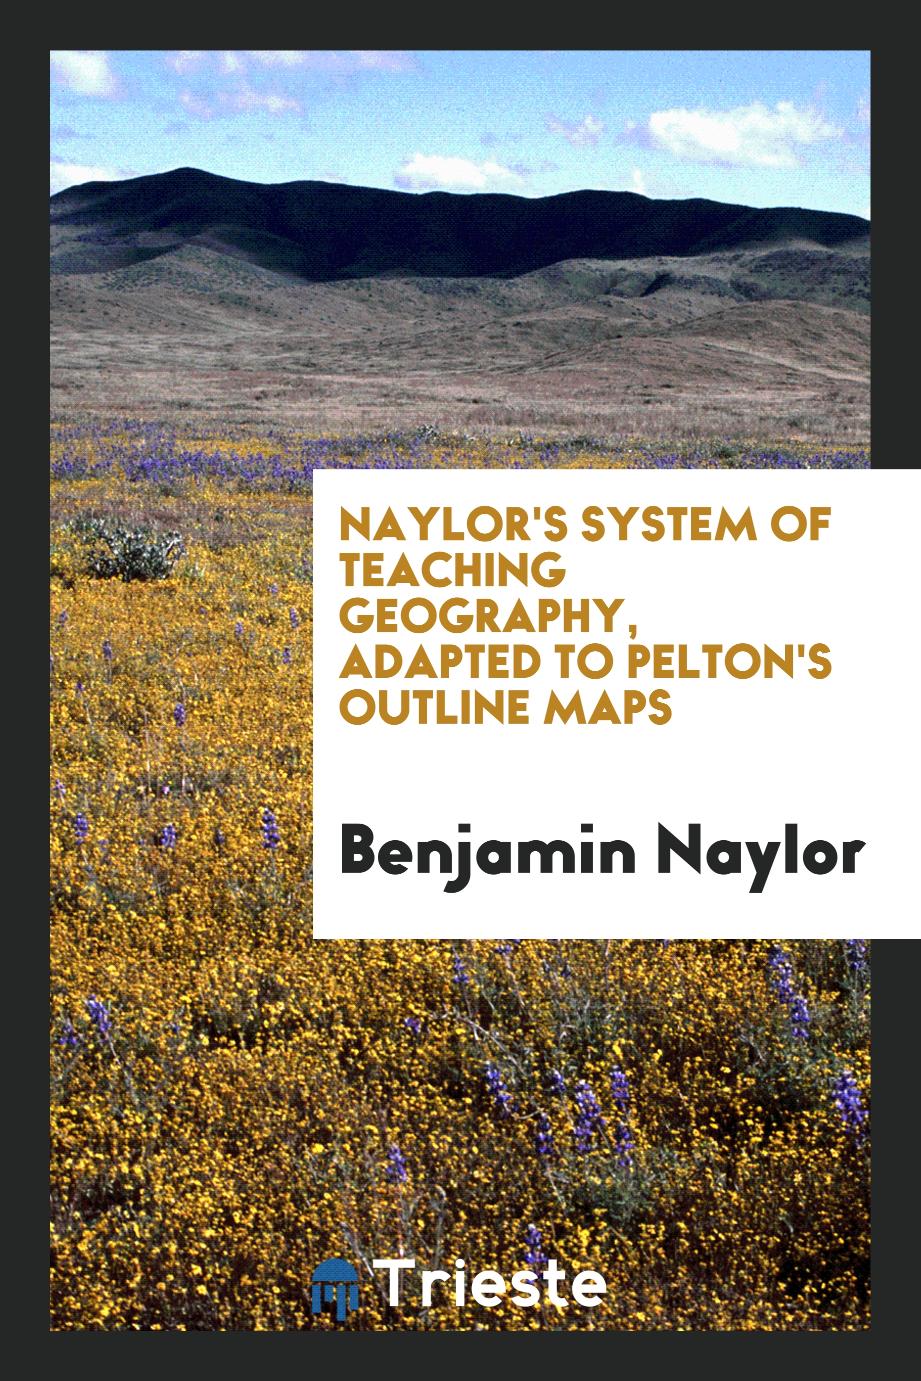 Naylor's System of Teaching Geography, Adapted to Pelton's Outline Maps